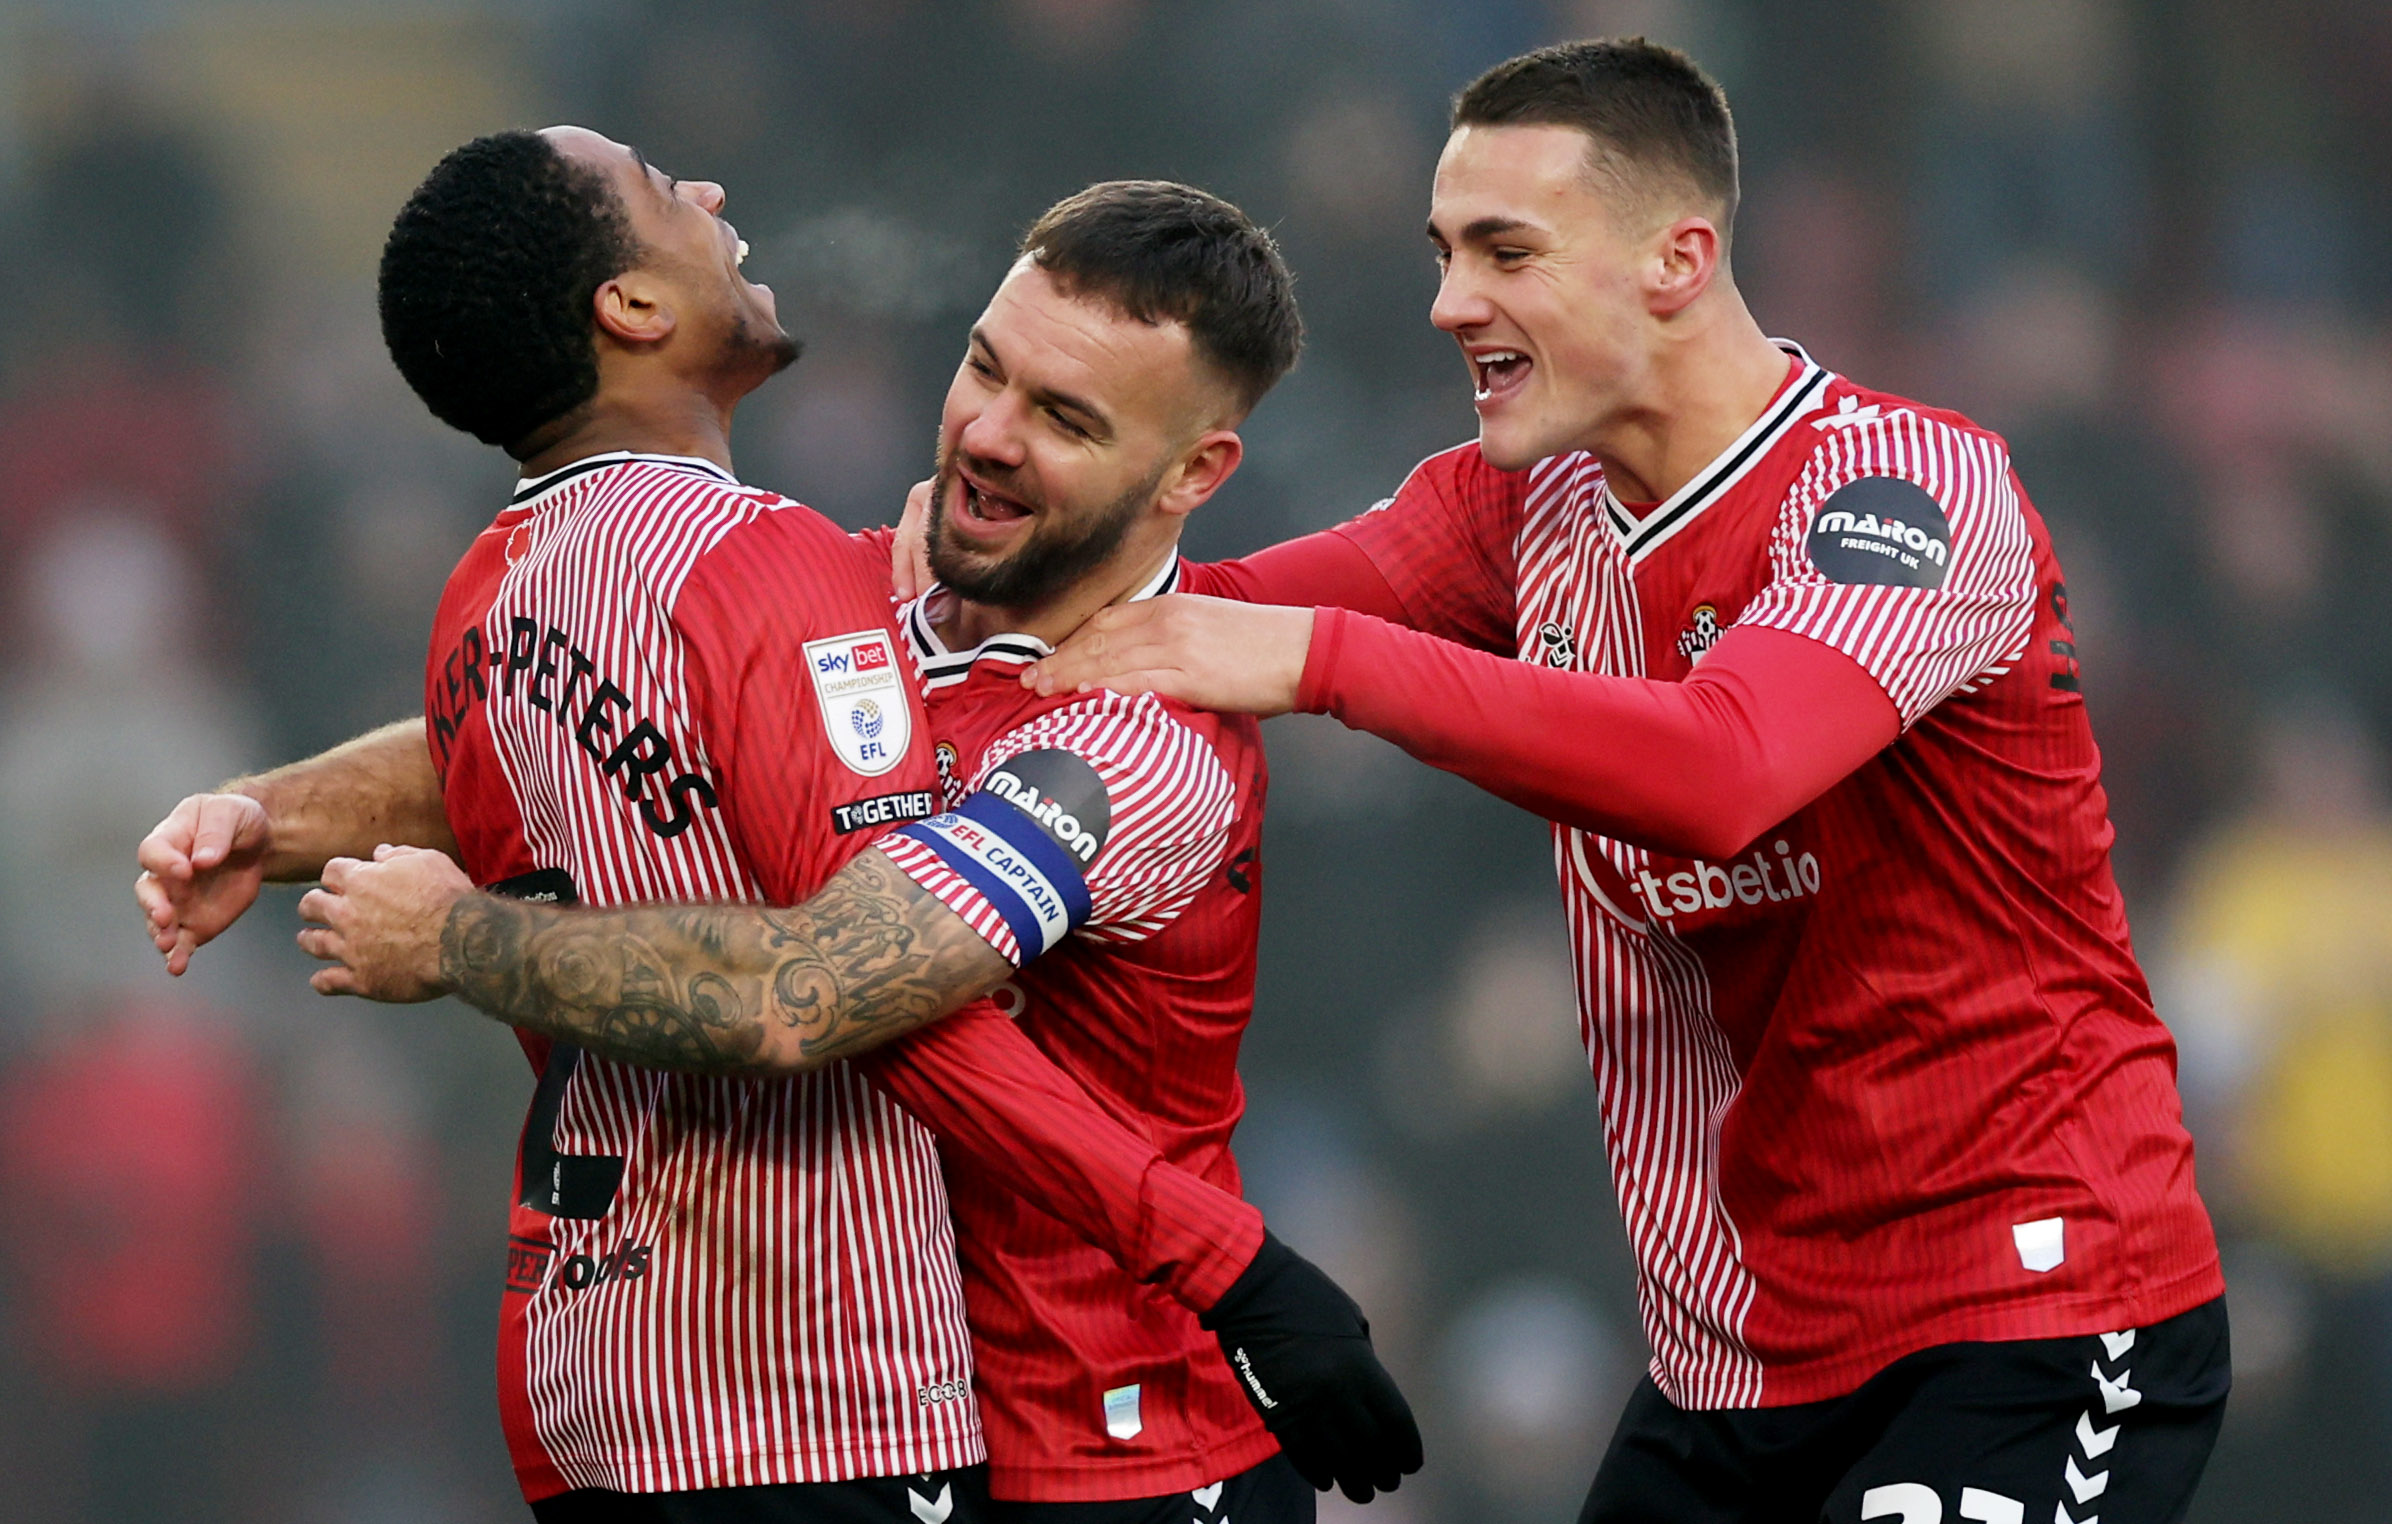 Kyle Walker-Peters, Adam Armstrong and Taylor Harwood-Bellis celebrate a Southampton goal while wearing their home kit 